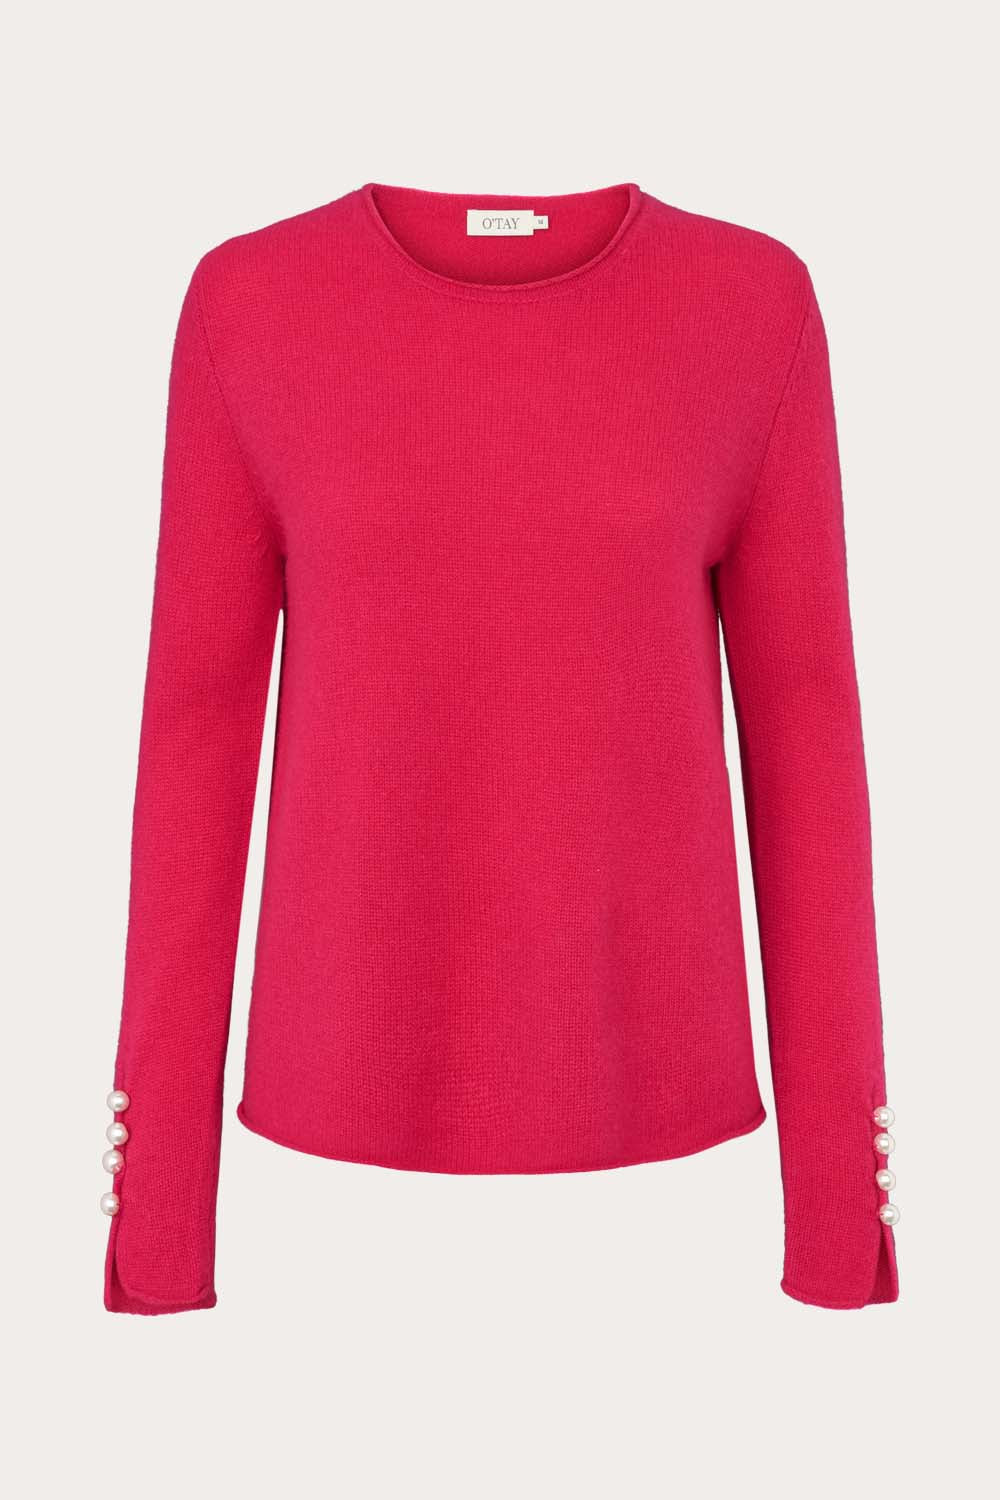 O'TAY Abbelone Sweater Bluser Hot Pink